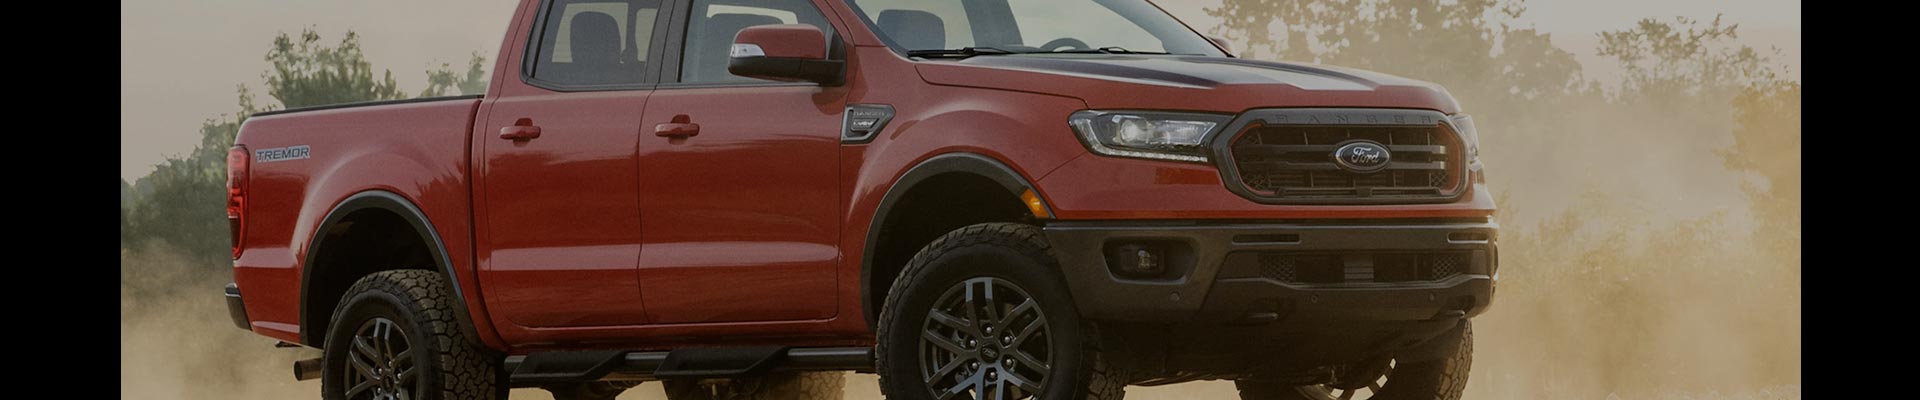 Shop Replacement and OEM 2020 Ford Ranger Parts with Discounted Price on the Net